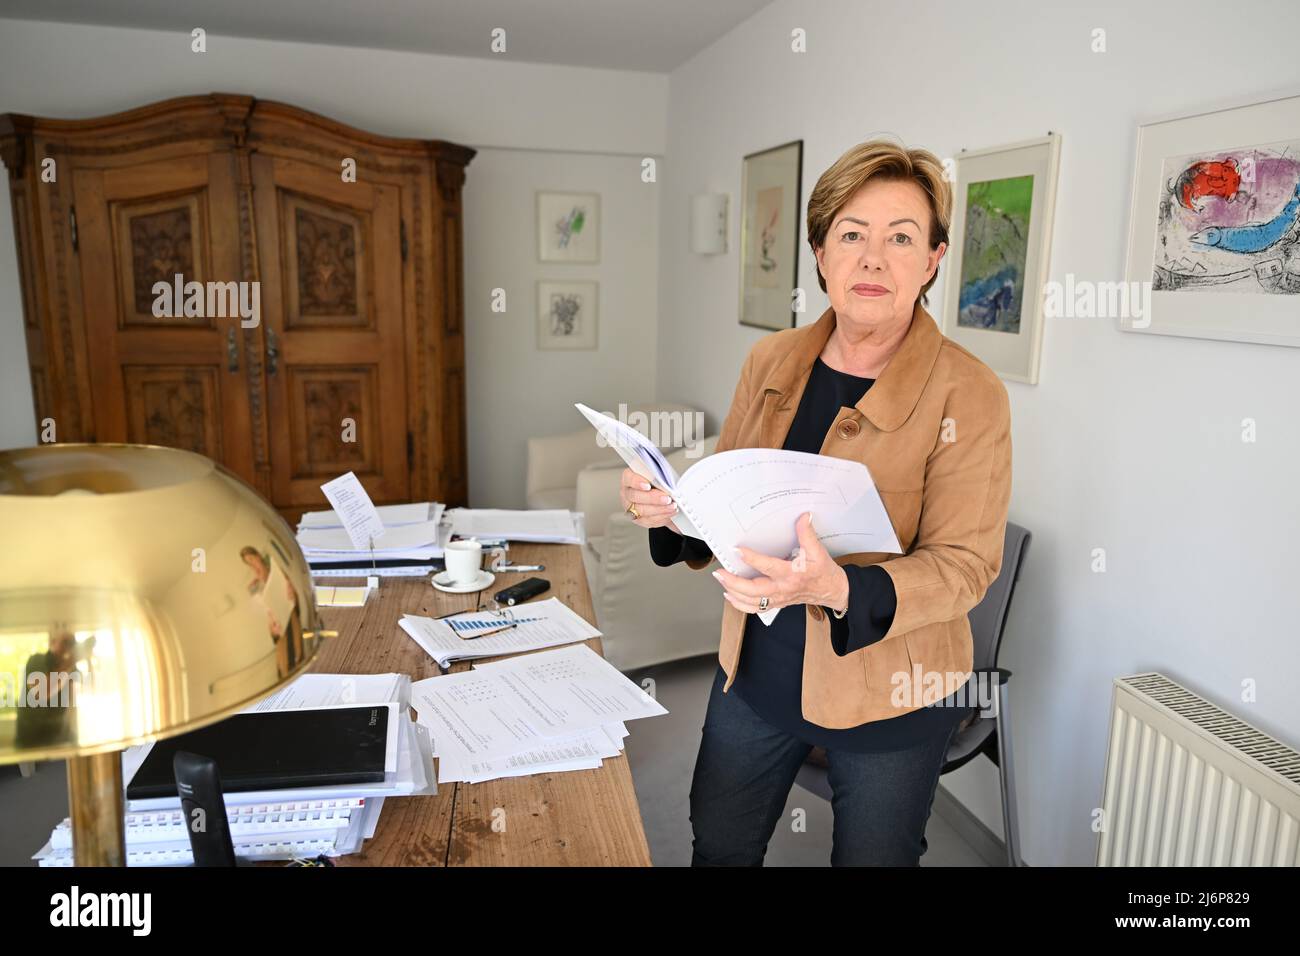 03 May 2022, Baden-Wuerttemberg, Allensbach Am Bodensee: Professor Renate  Köcher, Managing Director of the Institute for Public Opinion Research  (IfD) in Allensbach on Lake Constance, stands in her office with a study